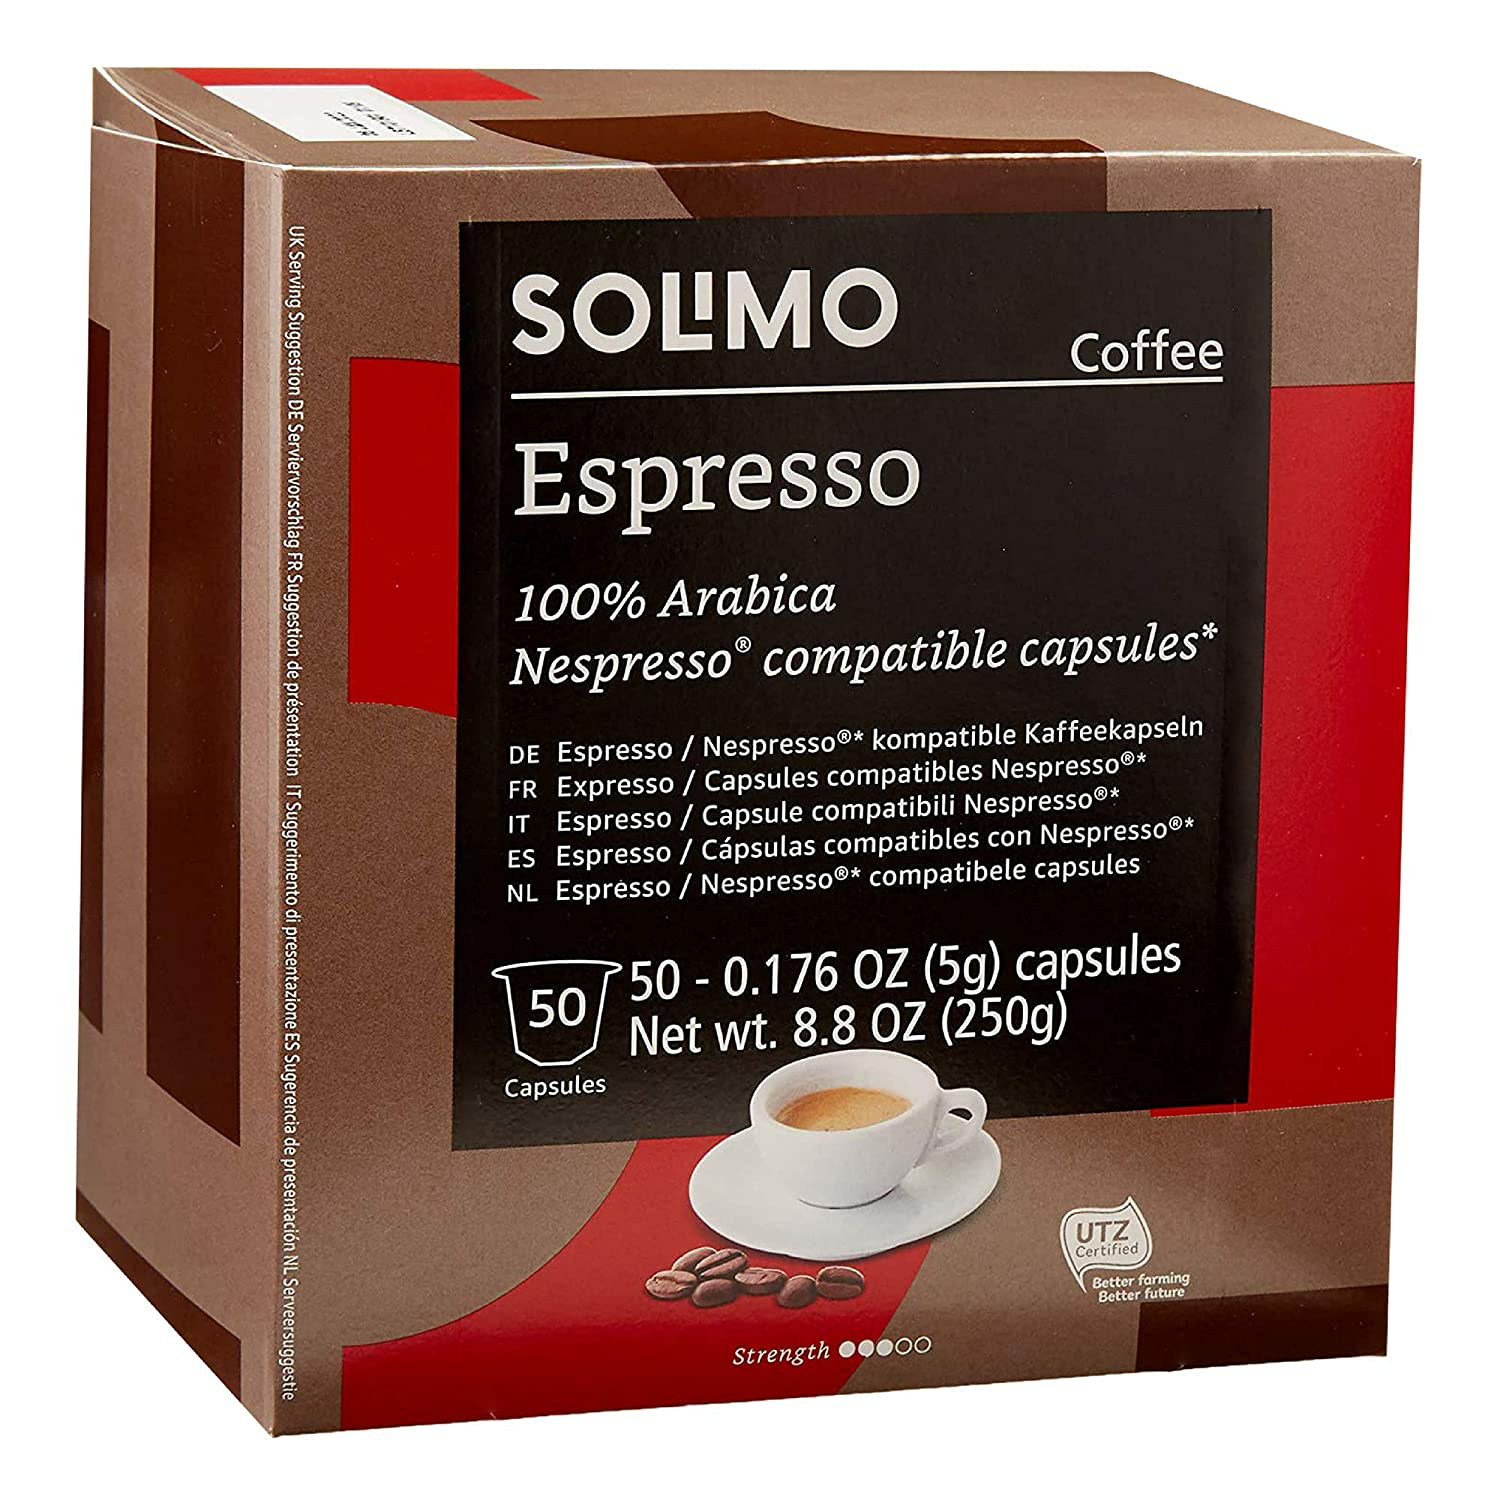 Solimo Espresso Capsules 50 CT, Compatible with Nespresso Original Brewers (as low as $35.64 for 200) $35.64